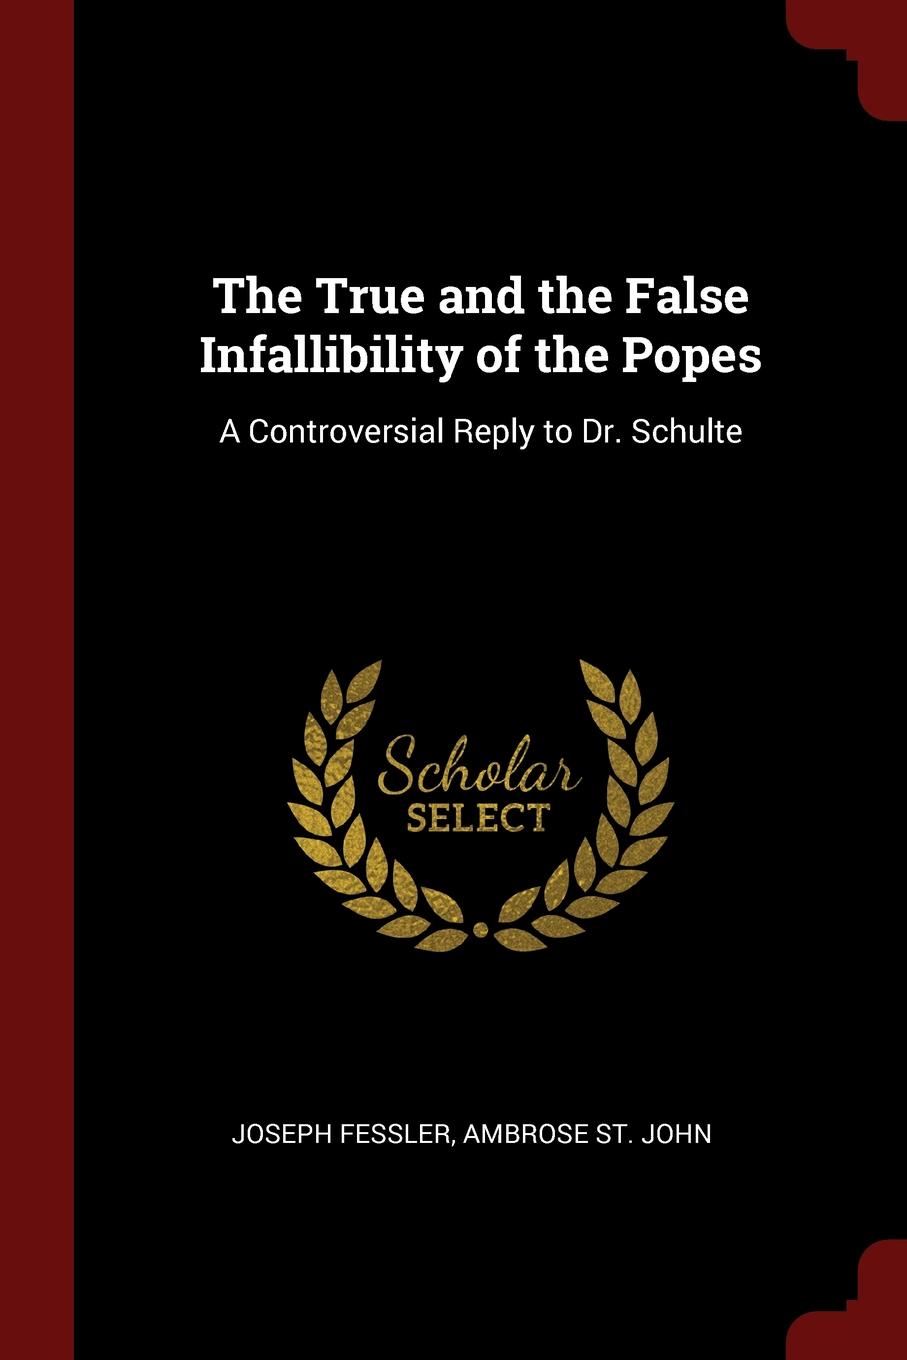 The True and the False Infallibility of the Popes. A Controversial Reply to Dr. Schulte